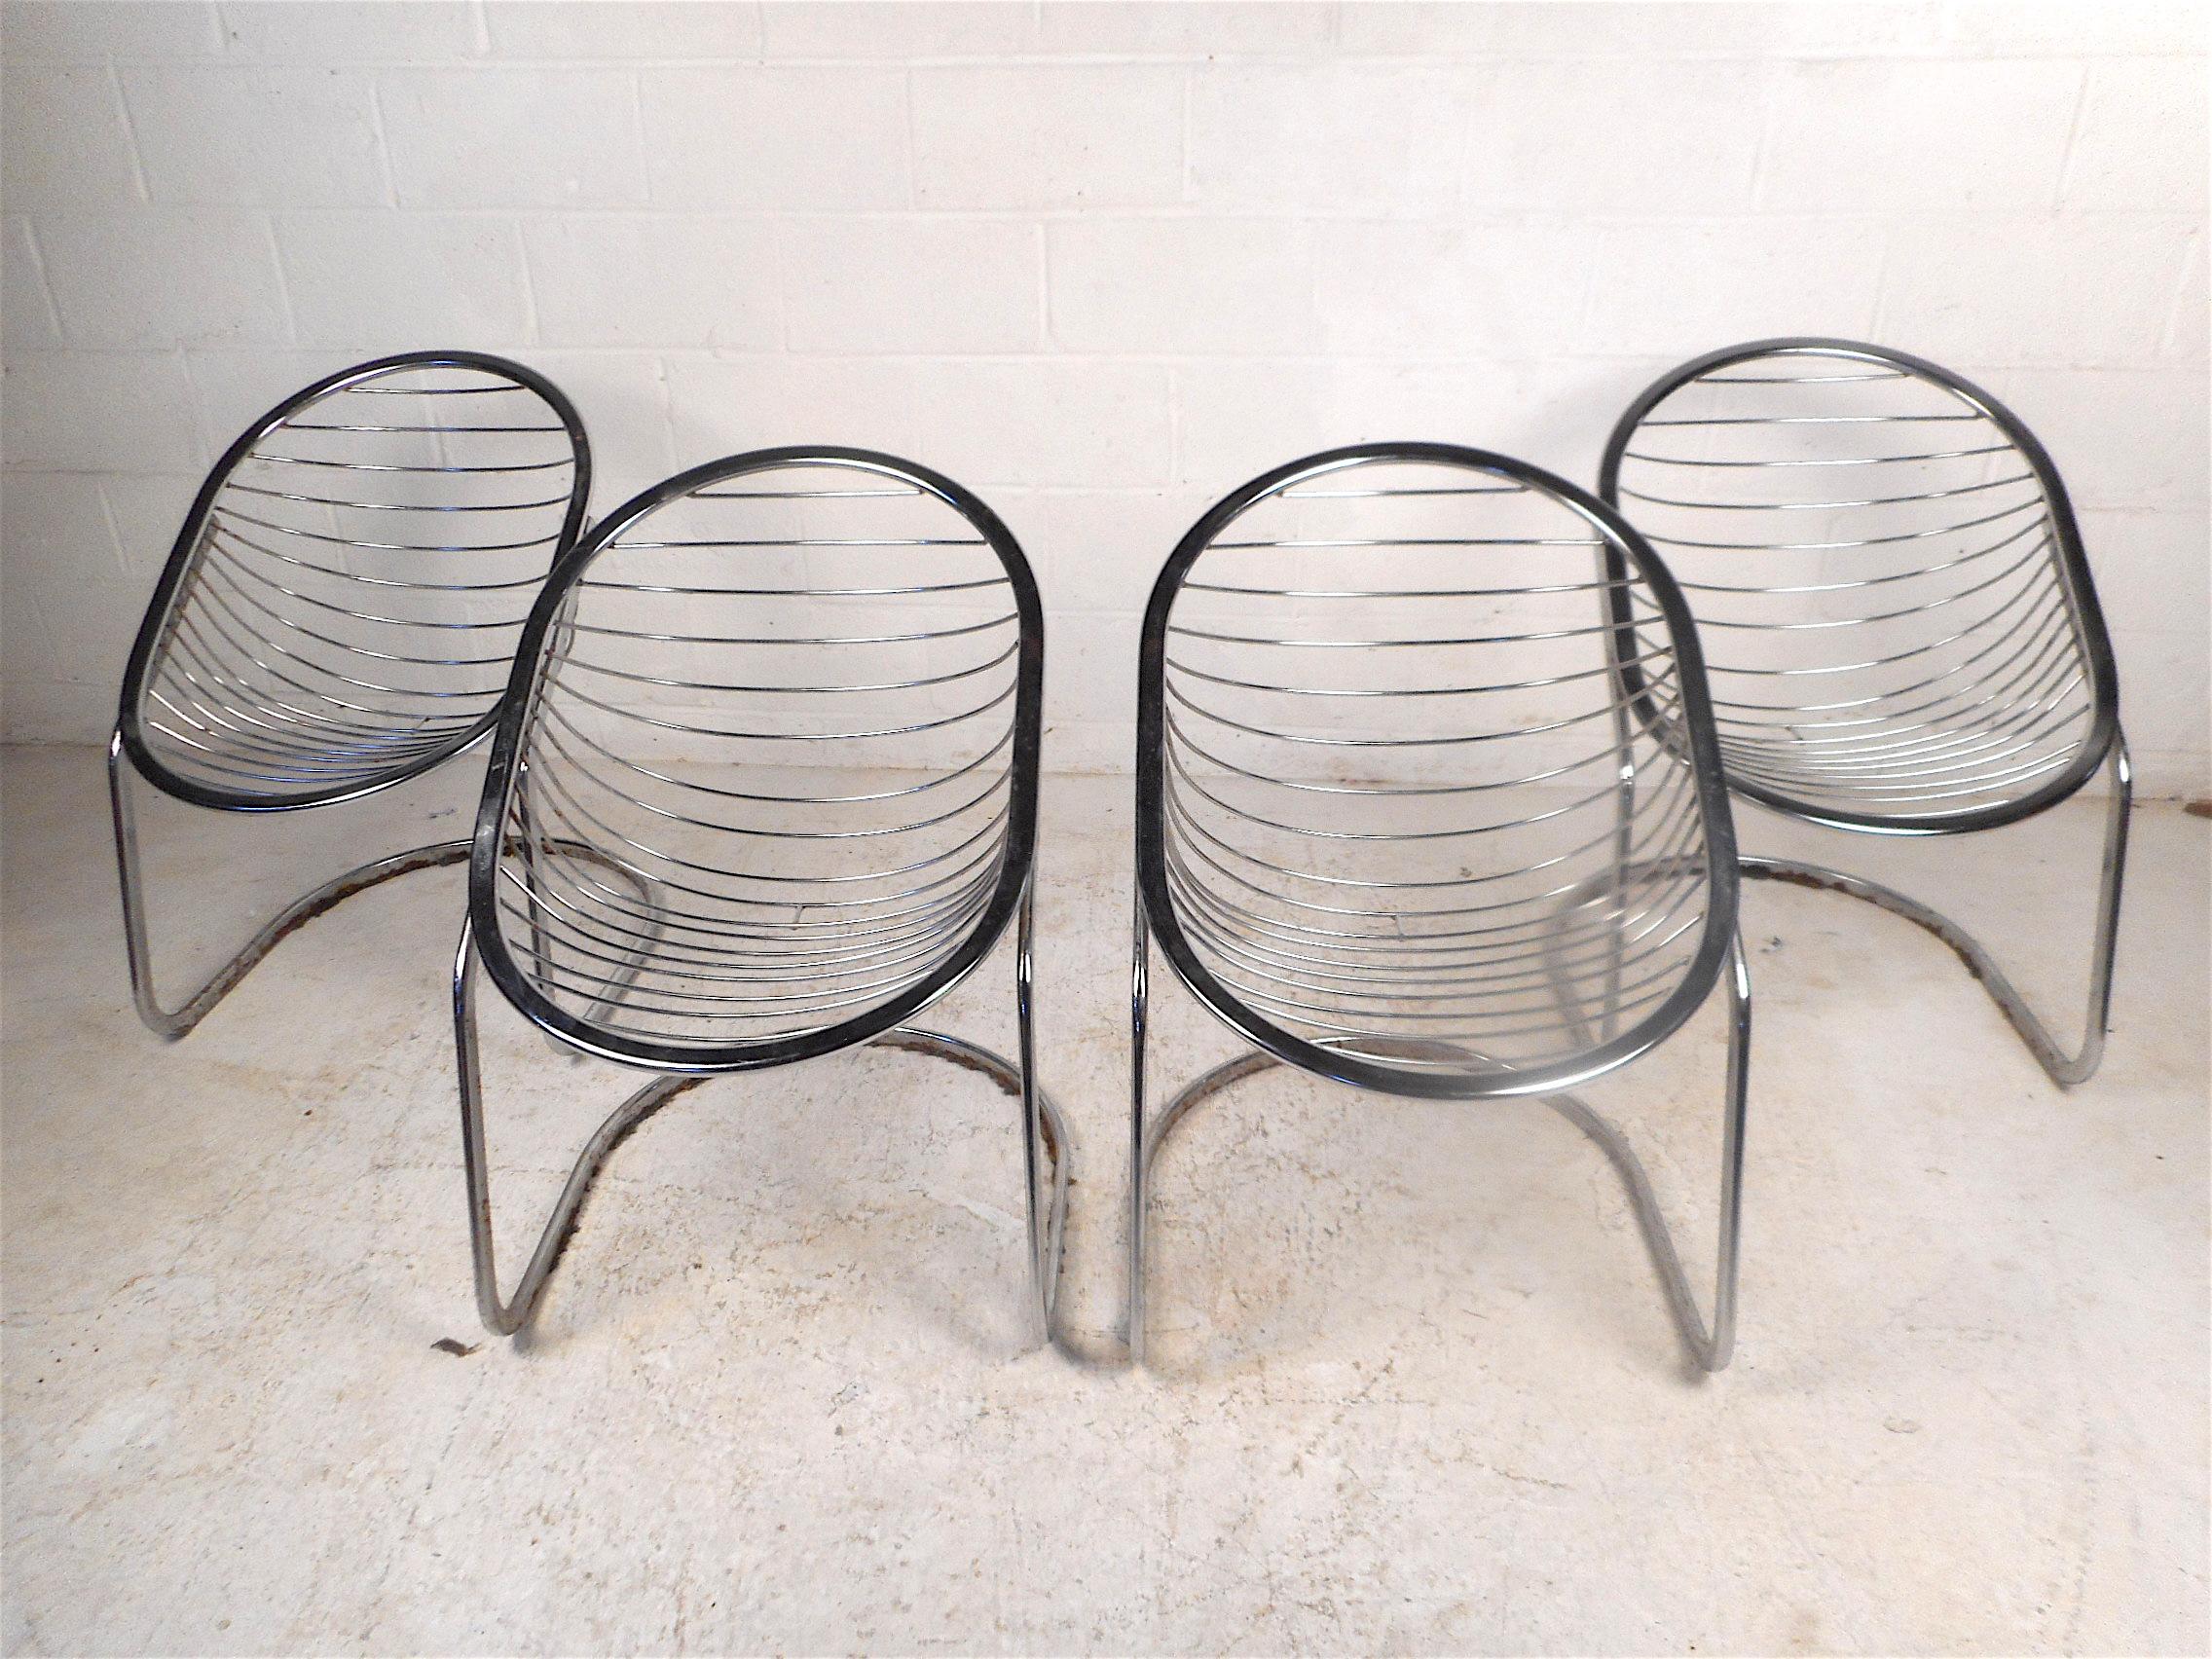 Stylish and unusual set of 4 cantilevered mid-century chairs. Chrome frame. Offset oval-shaped seats combined with sleek bases give these chairs a unique and striking visual profile. Sure to impress in any modern decor. Please confirm item location